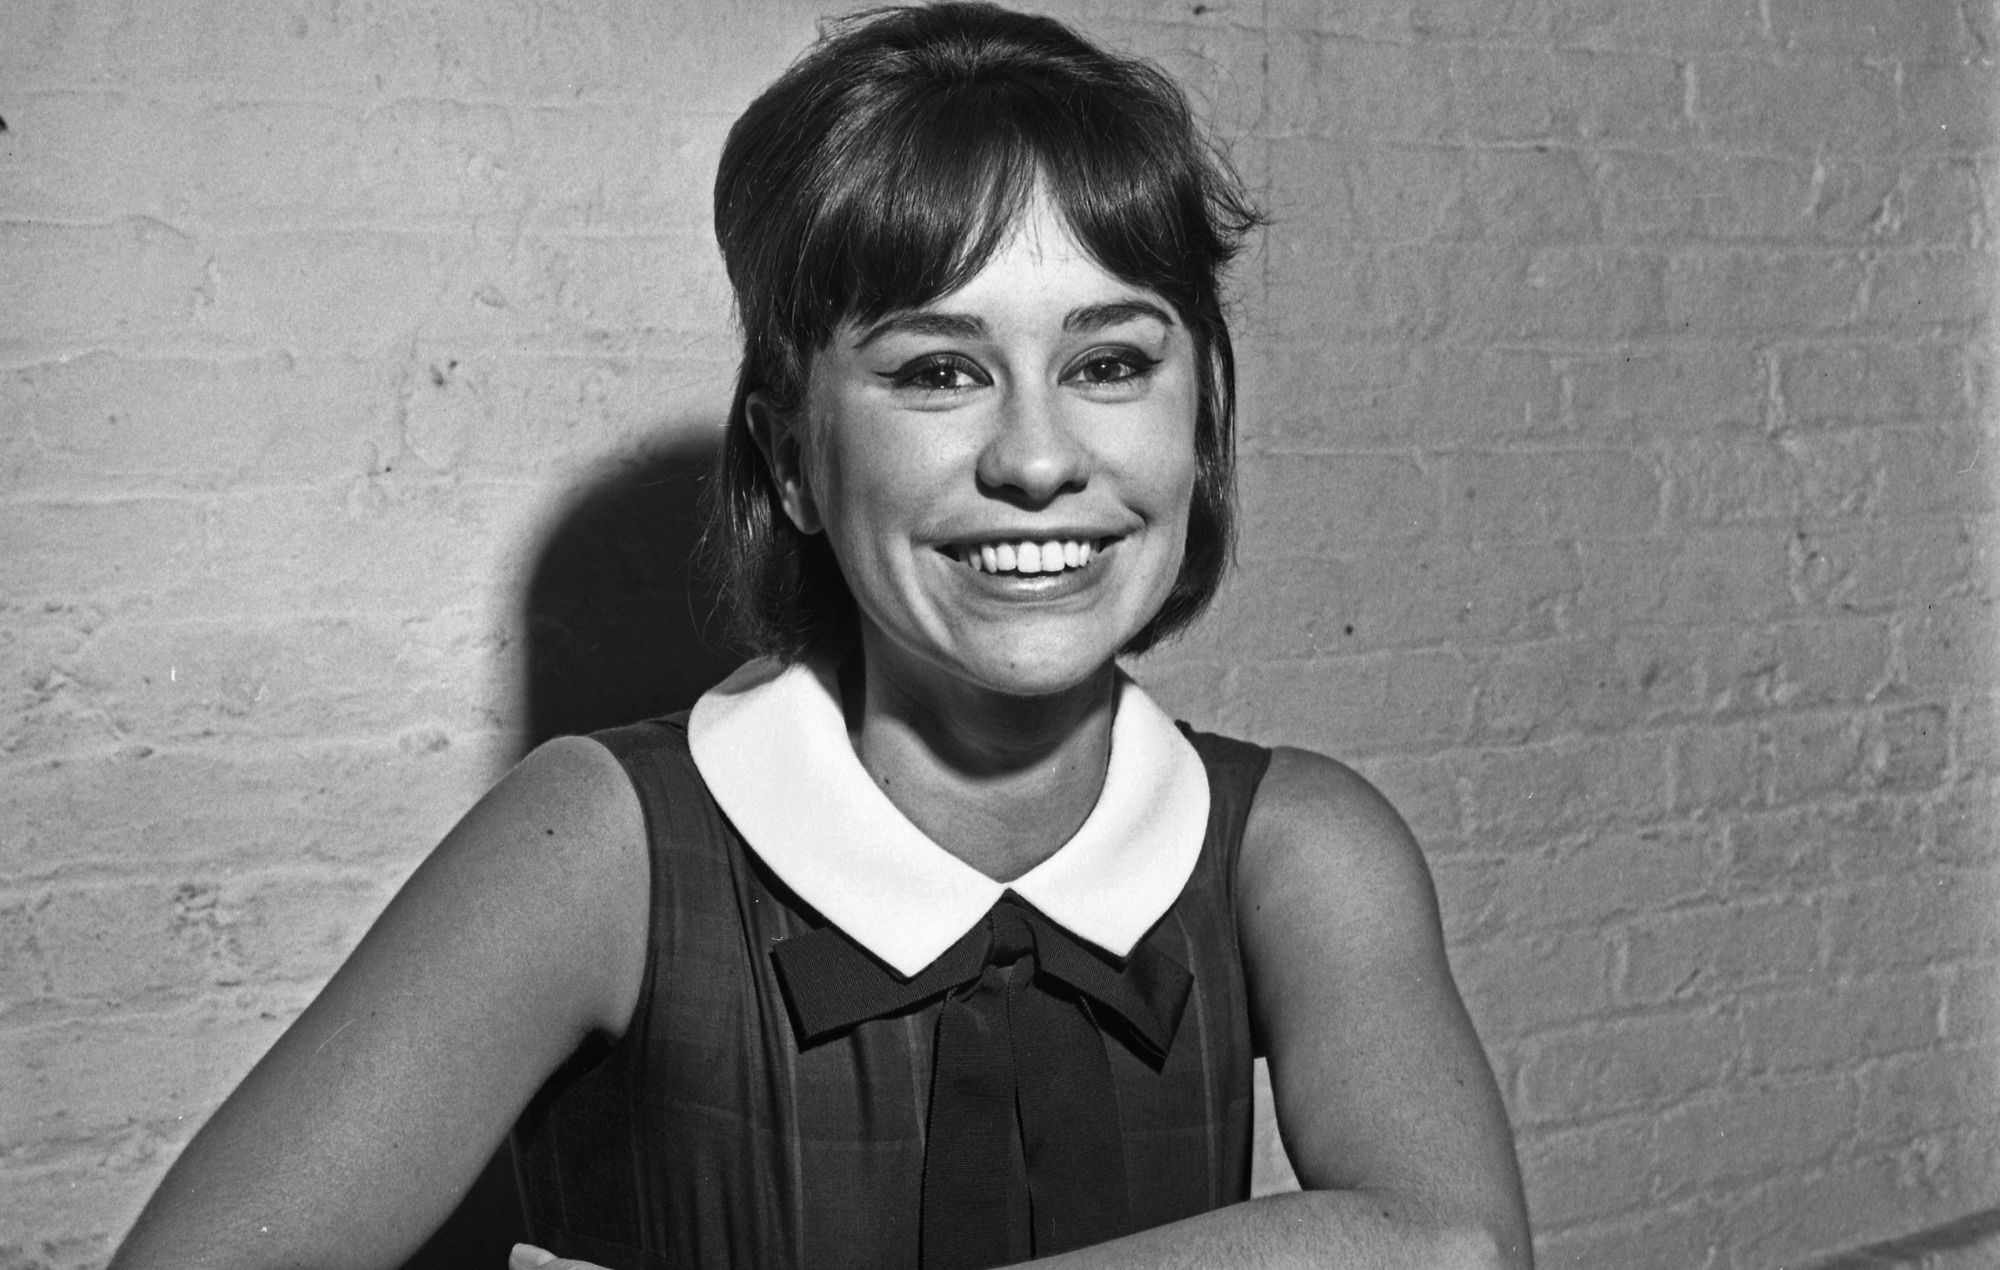 Jazz singer Astrud Gilberto poses for a portrait at Birdland on the day they recorded the Stan Getz live album, 1964